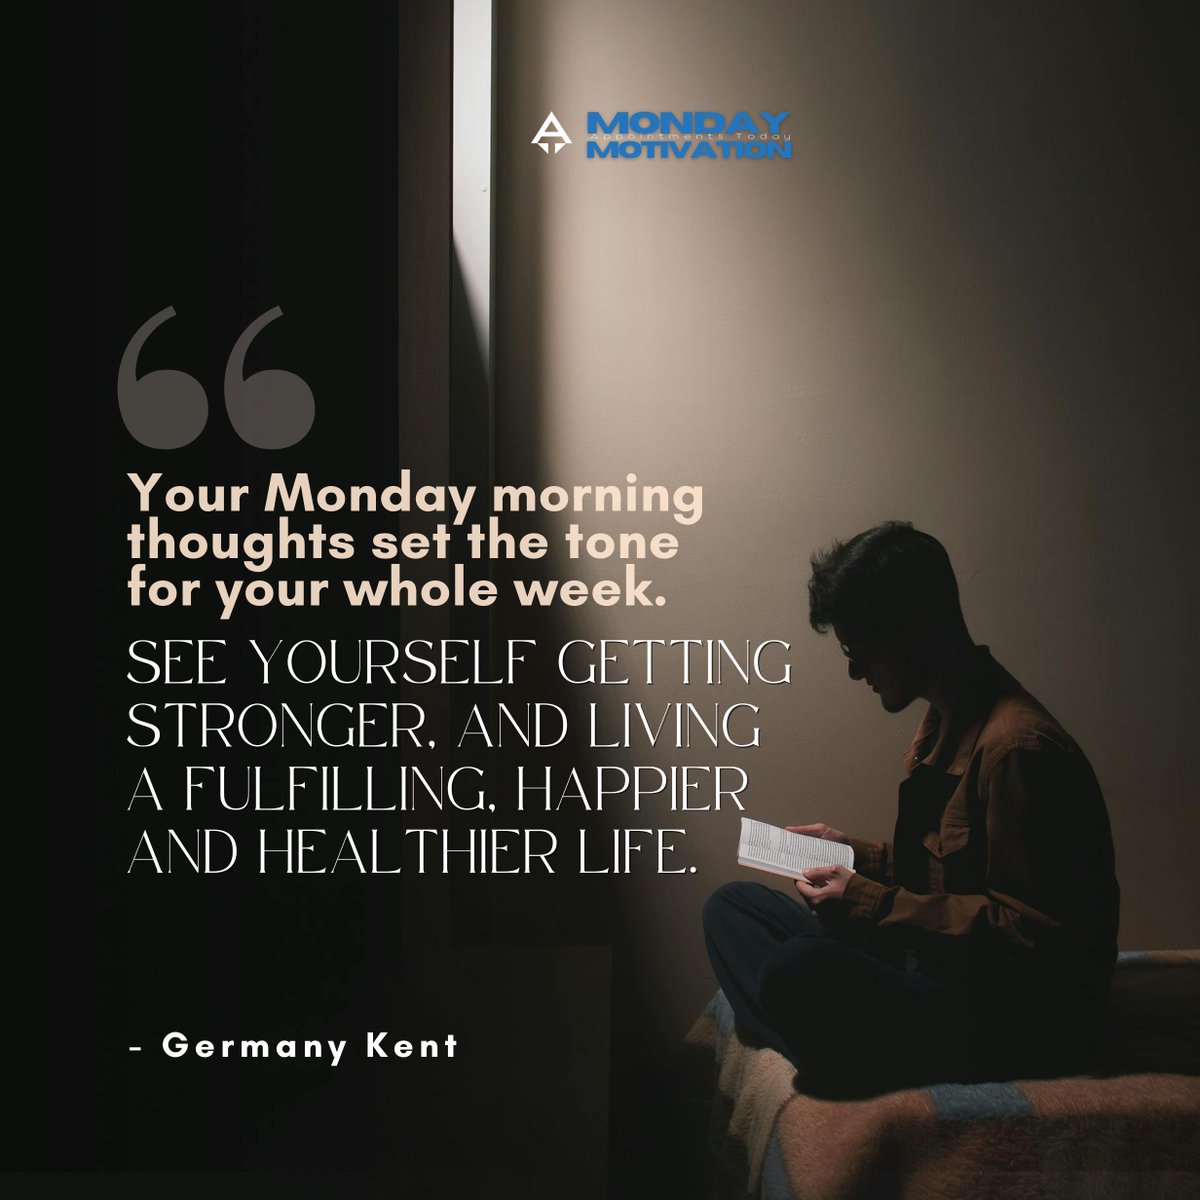 Embrace The Power Of Mondays And Set The Tone For An Amazing Week Ahead!💪
🔥Monday Motivation🔥
#mondaymotivation #appointmentstoday #mattmilia #marketing #leadgen #sales #insidesales #agent #isa #insidesalesteam #realestate #realestateagent #realtor #exprealty #expproud #boss